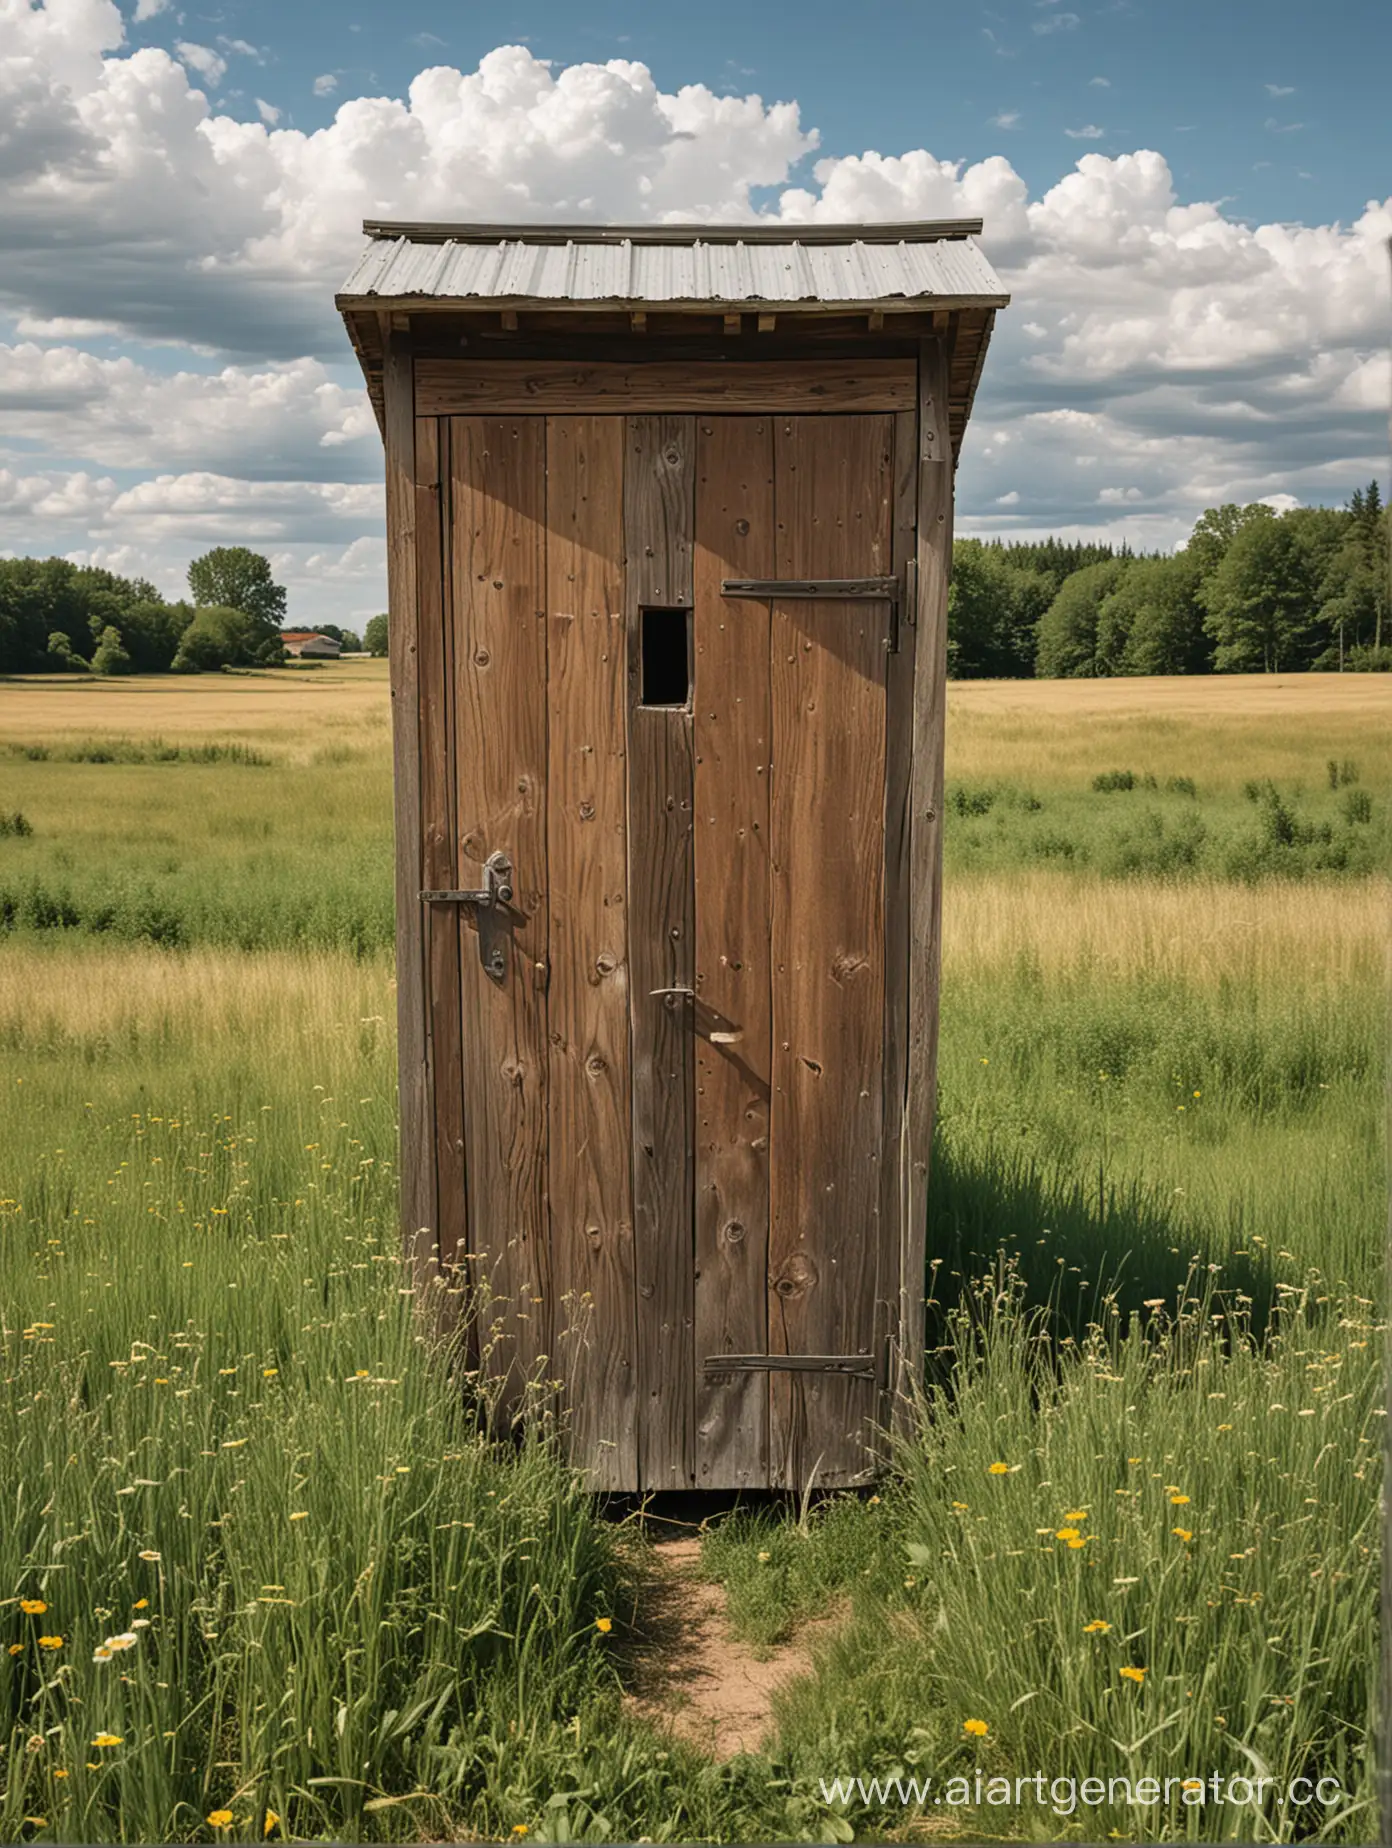 Rustic-Outhouse-Door-Amidst-Serene-Countryside-Landscape